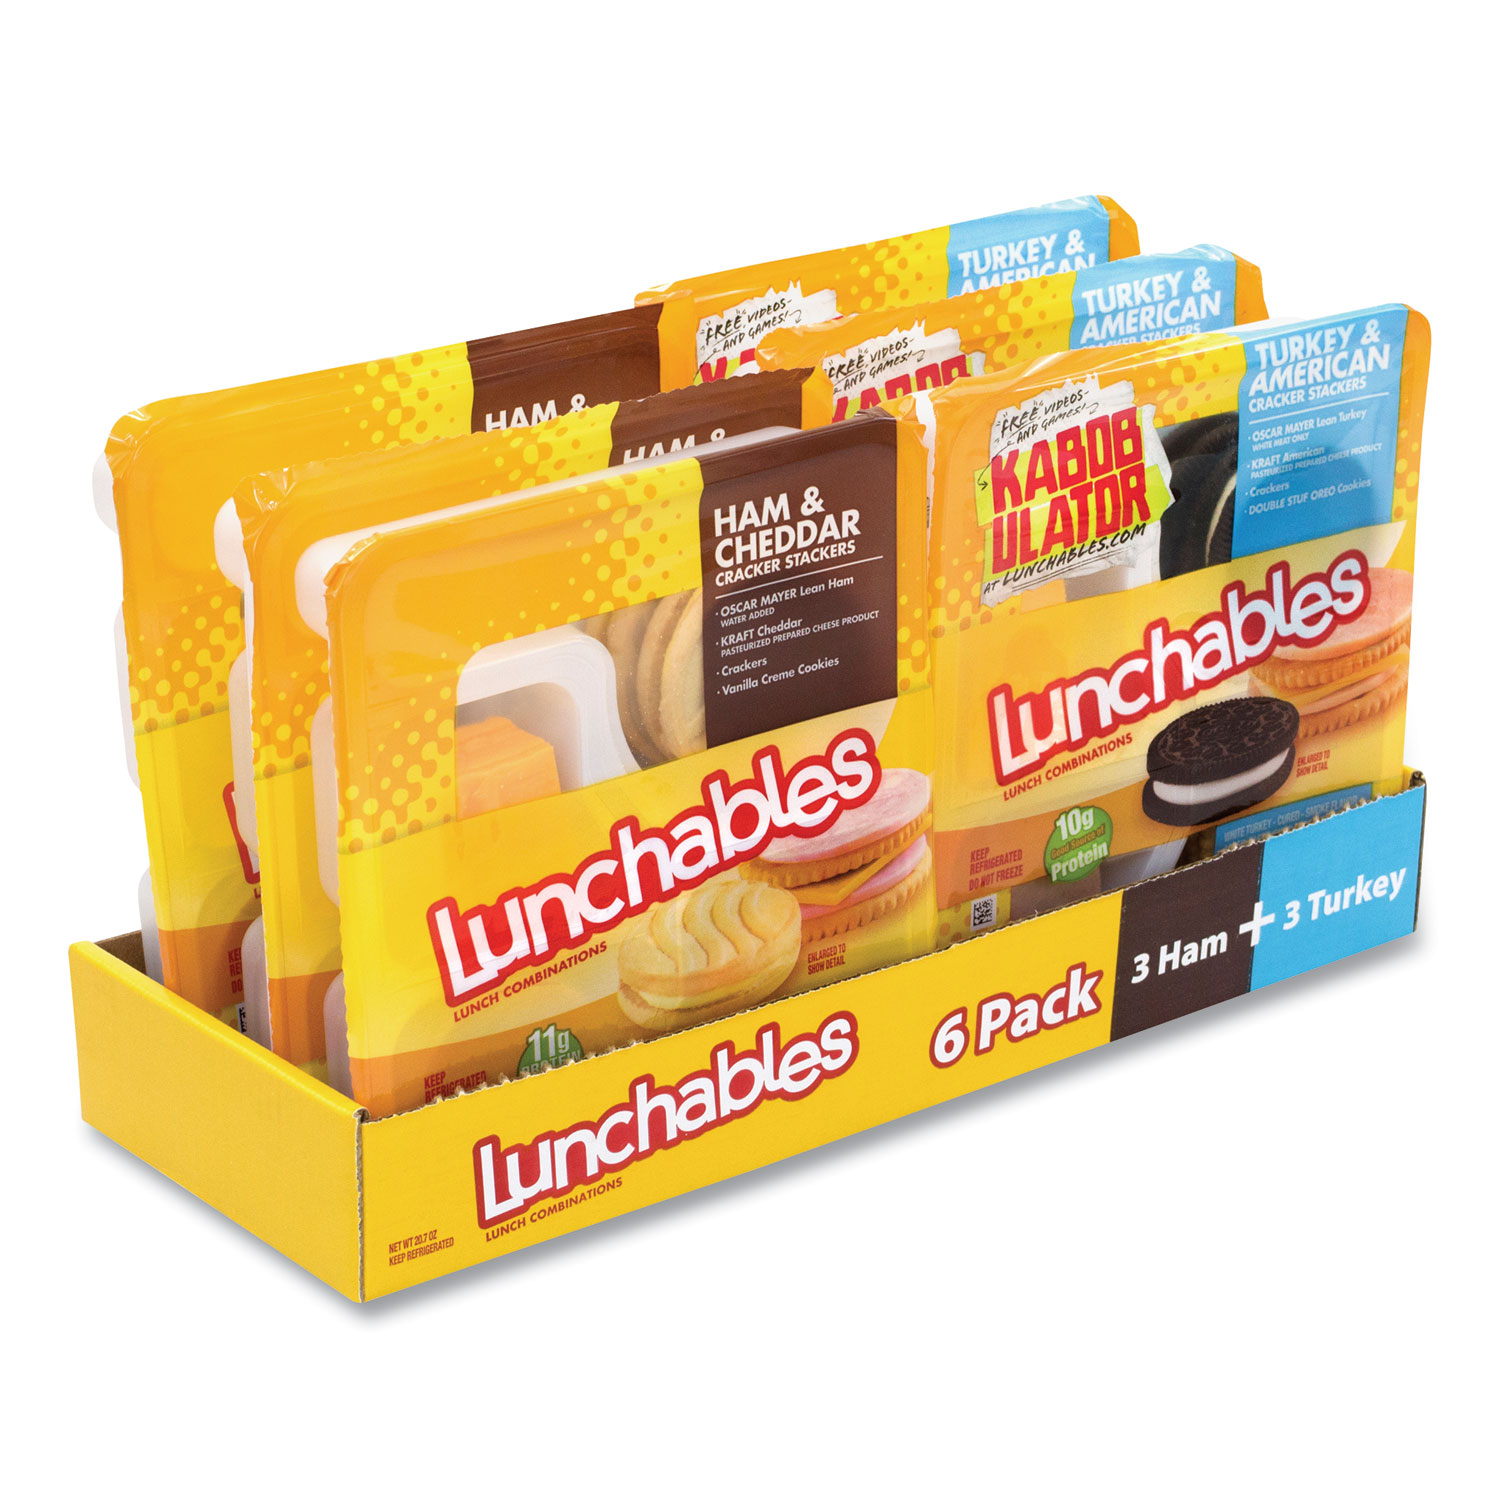  Oscar Mayer 7545 Lunchables Variety Pack, Turkey/American and Ham/Cheddar, 6/Box, Free Delivery in 1-4 Business Days (GRR90200011) 